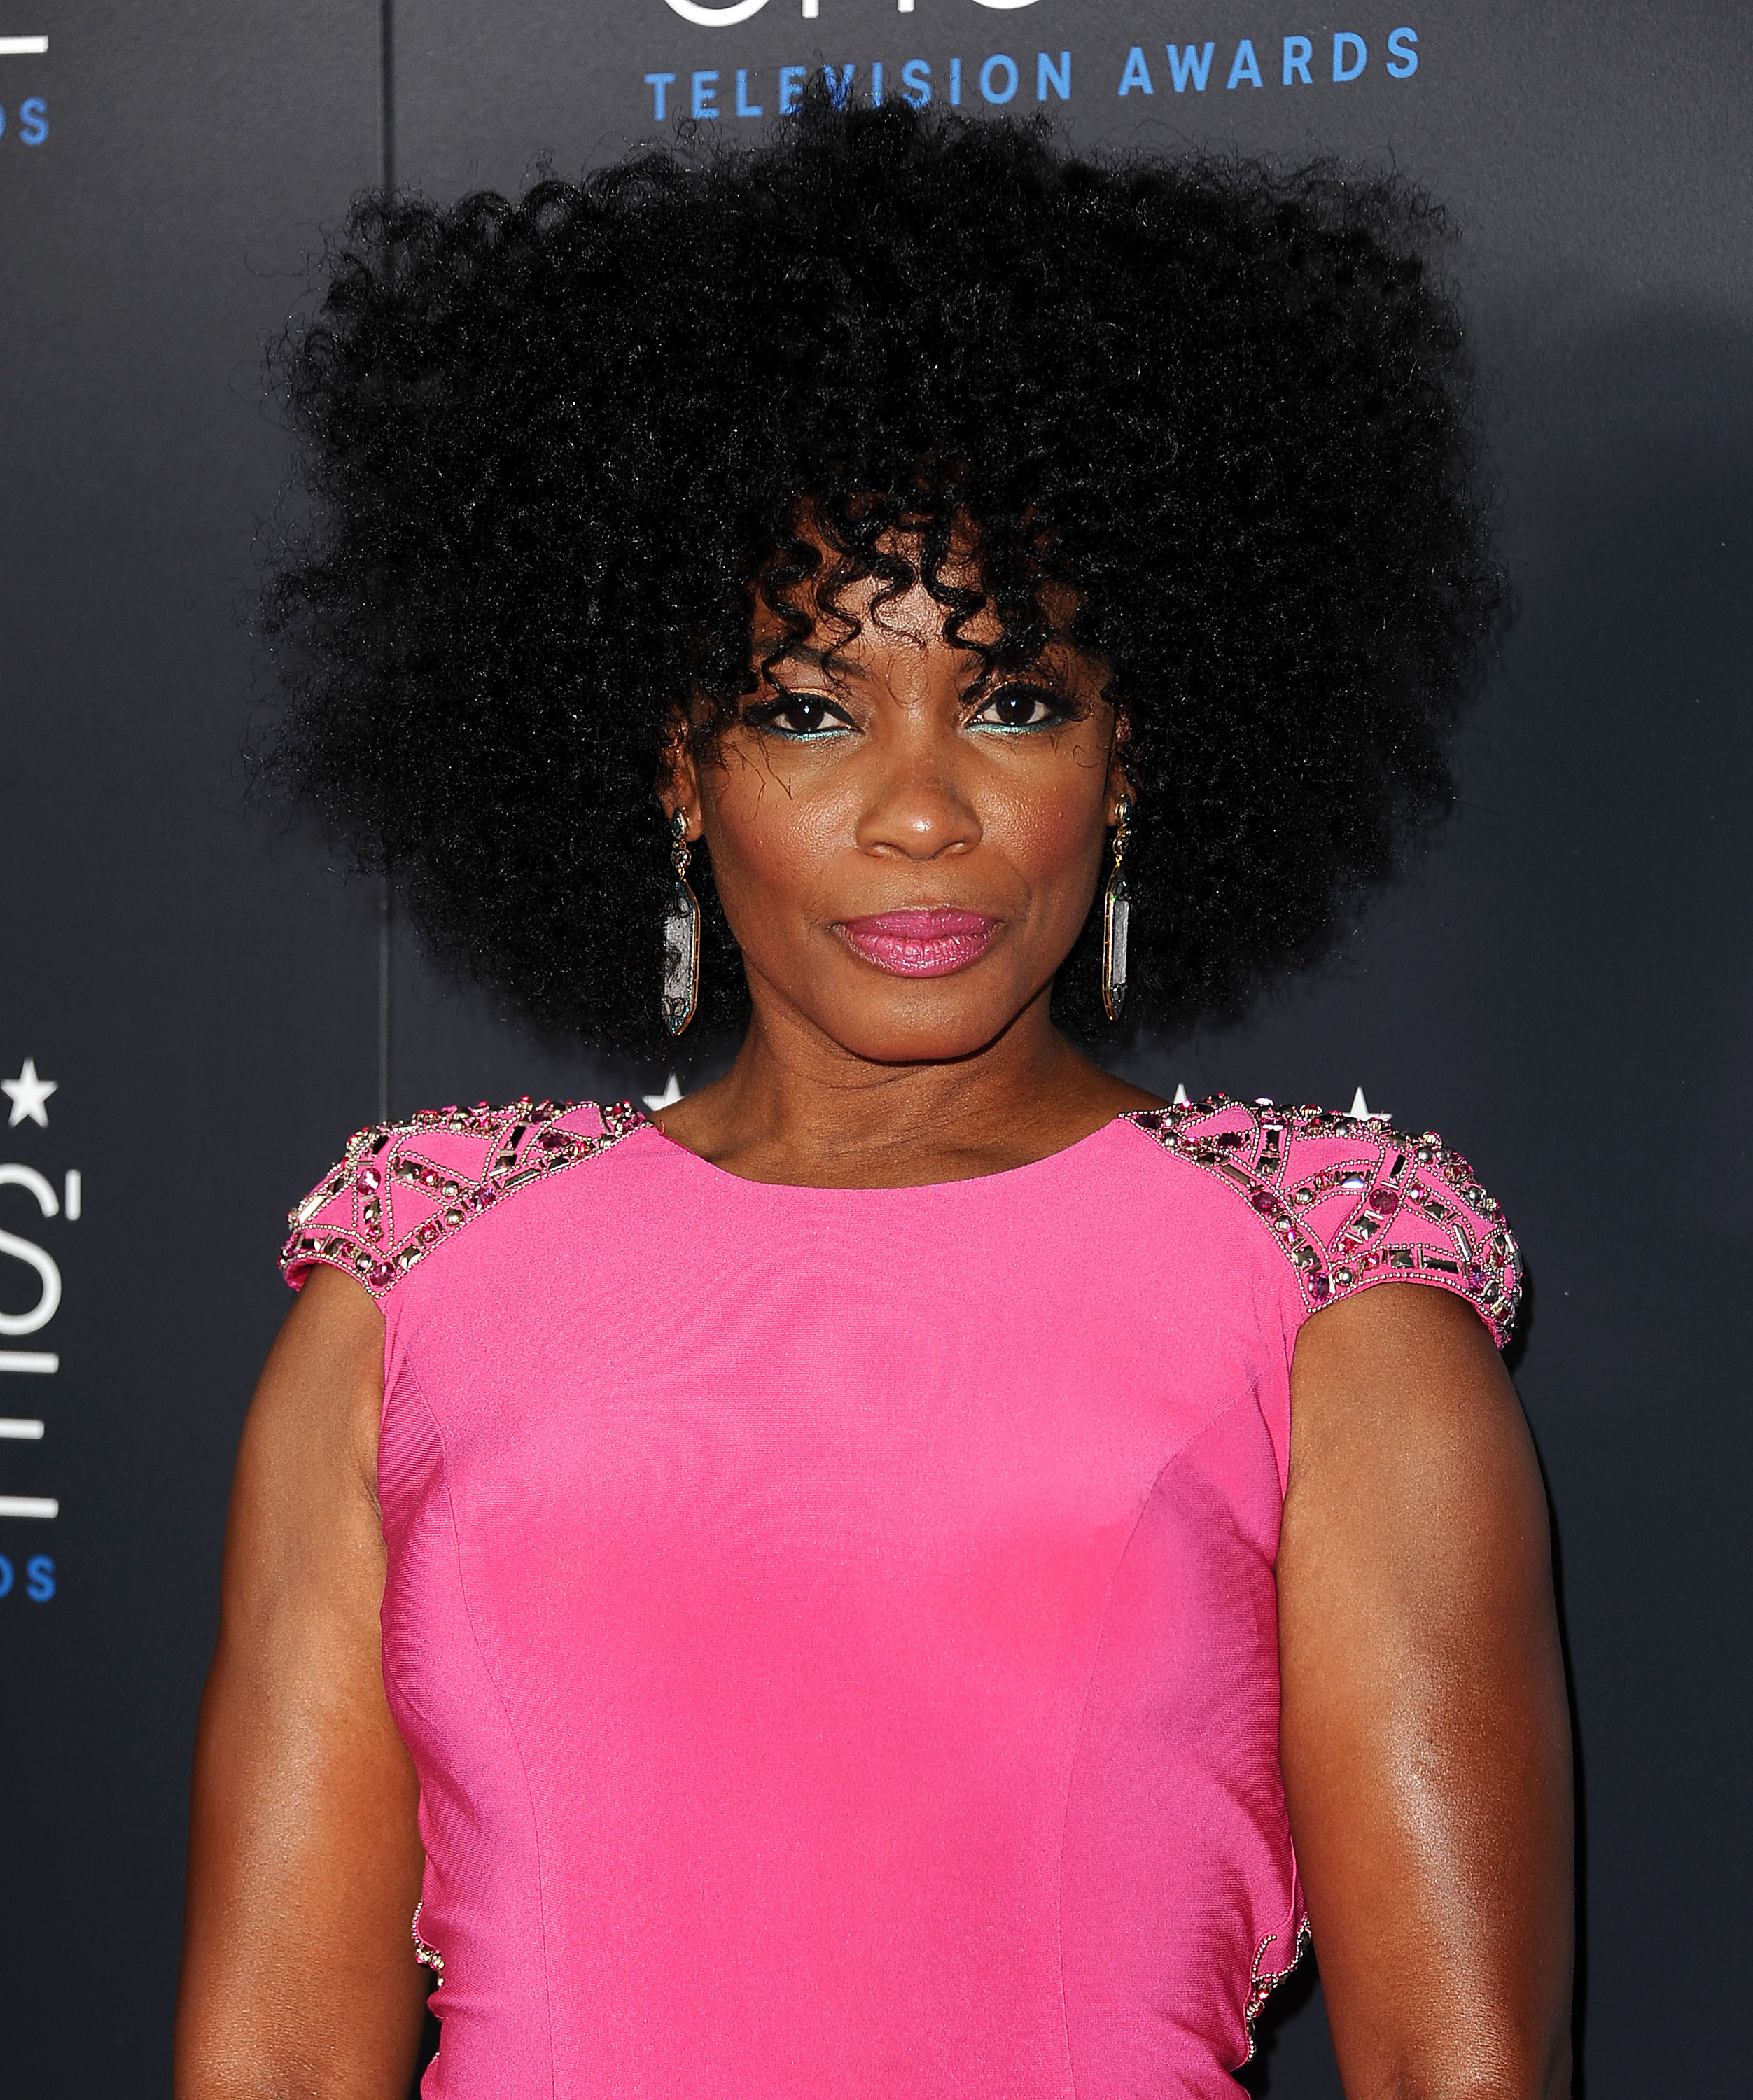 Aunjanue Ellis attends the 5th annual Critics' Choice Television Awards at the Beverly Hilton Hotel on May 31, 2015 in Beverly Hills, California.